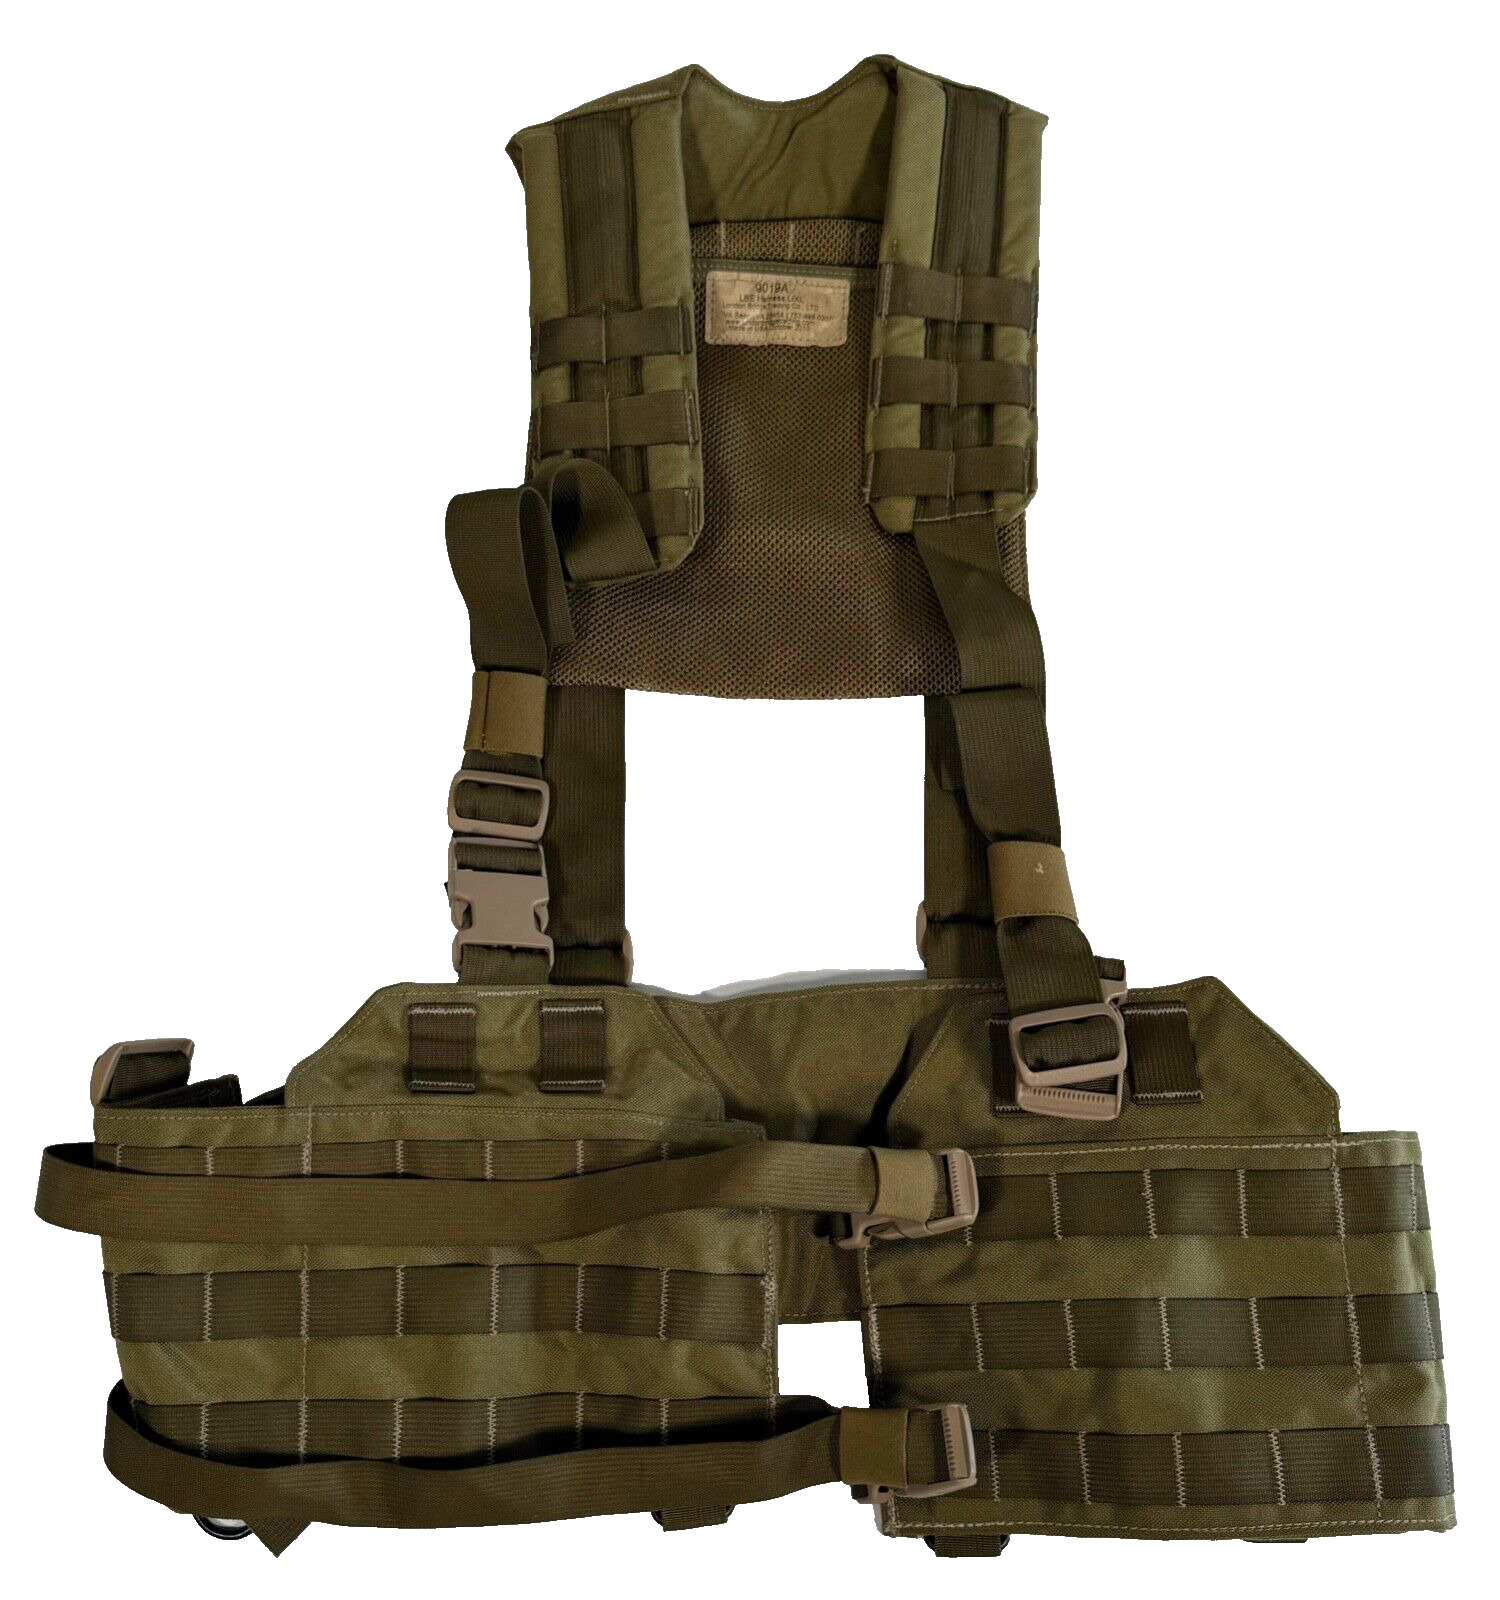 New London Bridge Trading LBT-9019A MOLLE Load Bearing LBE Harness Chest Rig